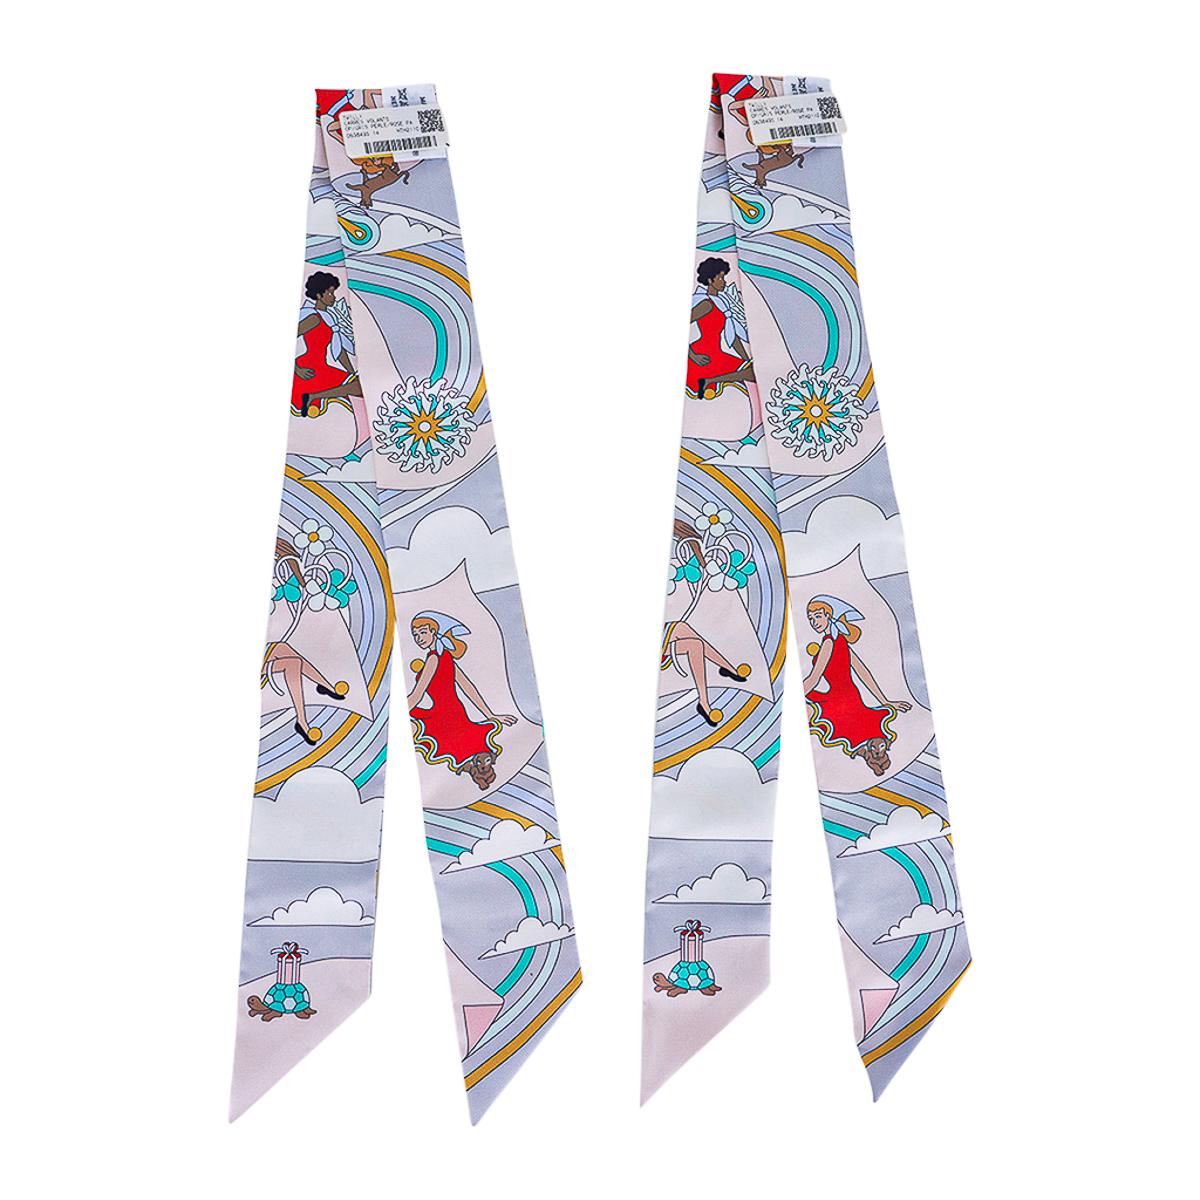 Hermes Twilly Carres Volants Gris Perle / Rose Pale Silk Scarf Set of 2 For Sale 3